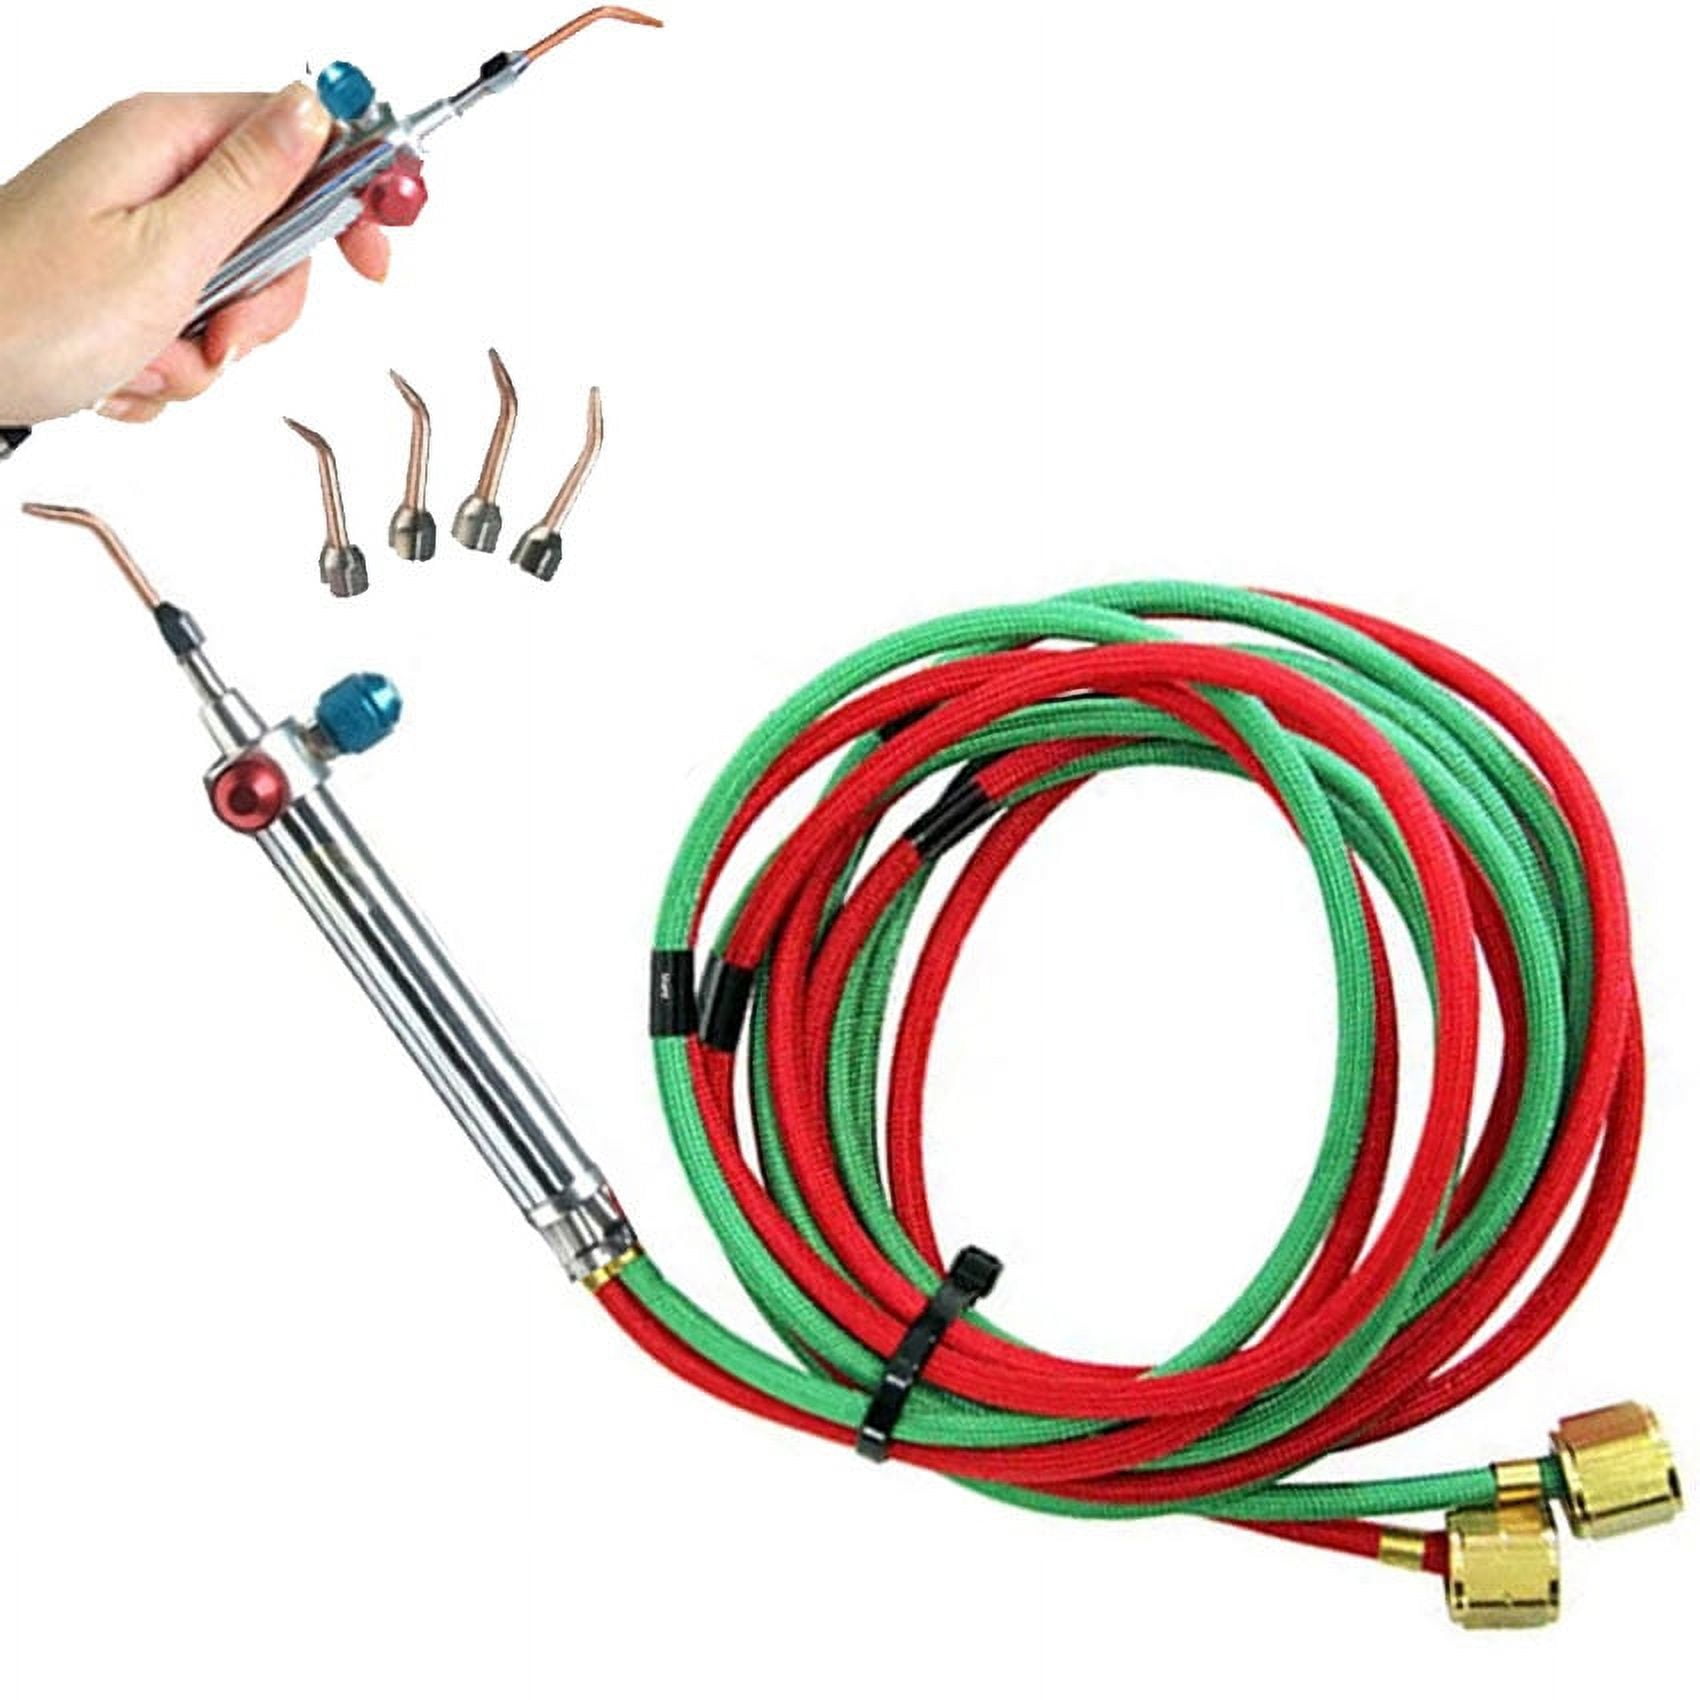 Soldering Jewelry Torch Kit With 5 Tips Oxygen/propane Melting